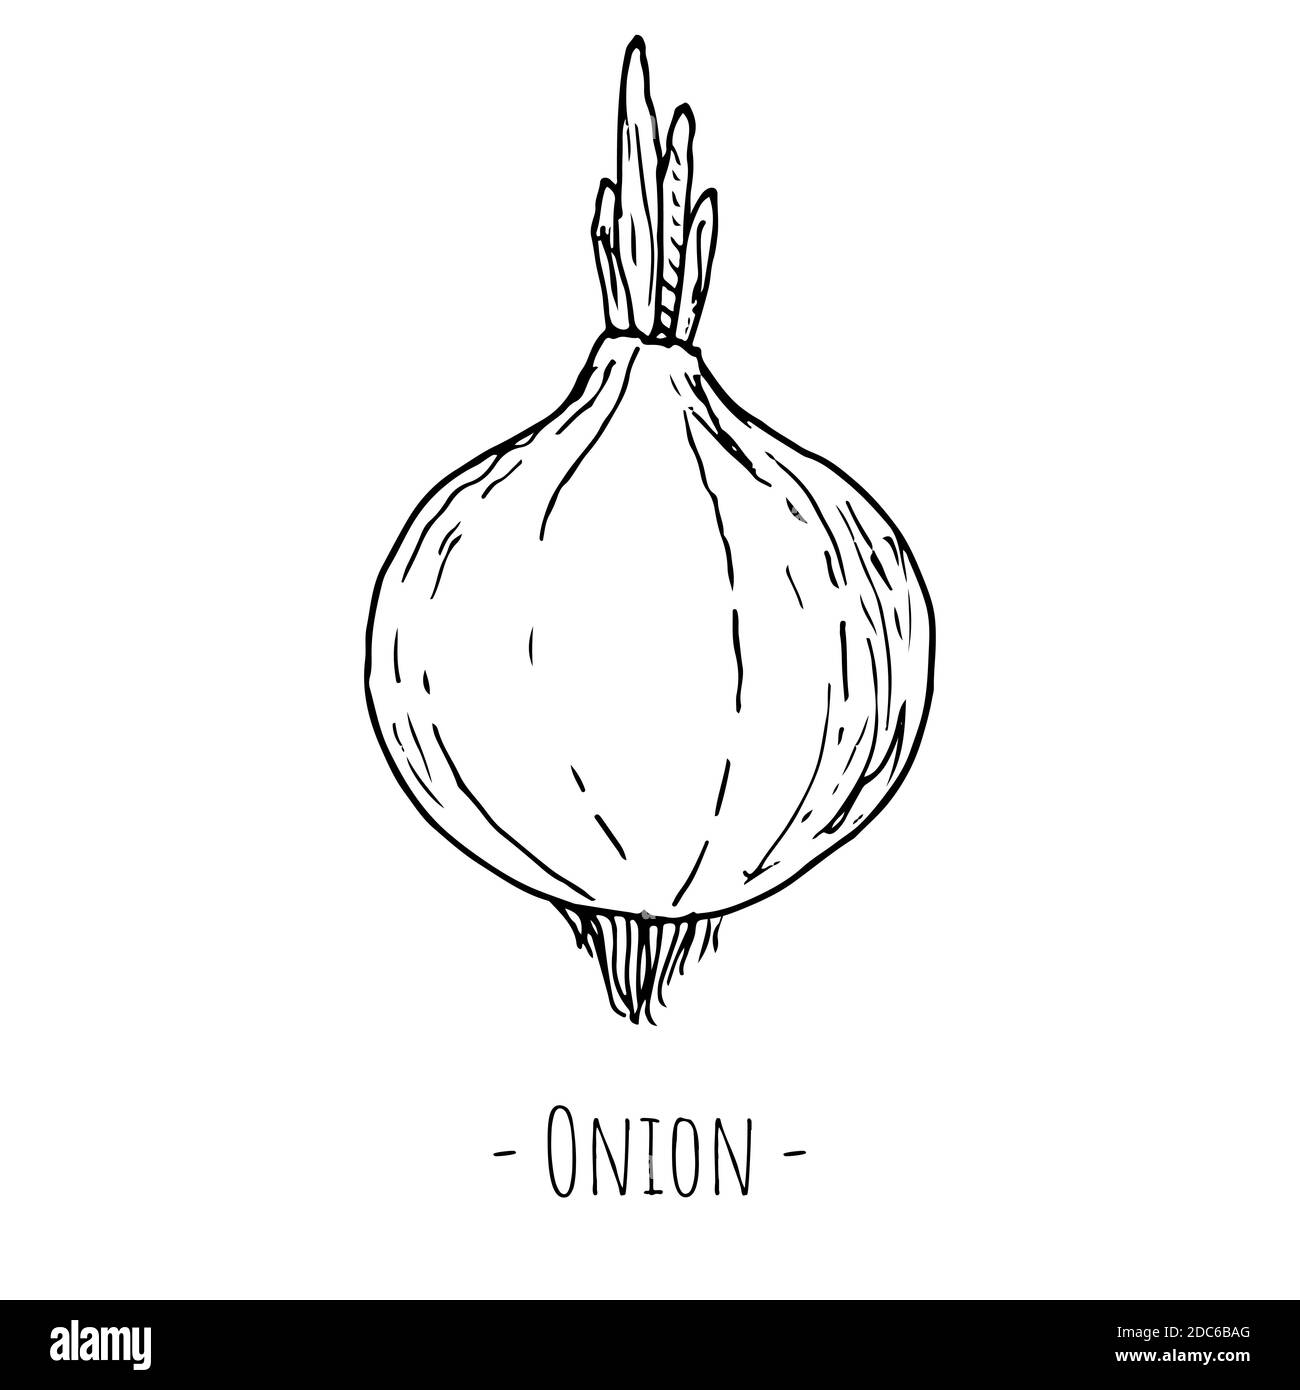 Onion. Vector illustration. Isolated on white. Hand-drawn style. Stock Vector